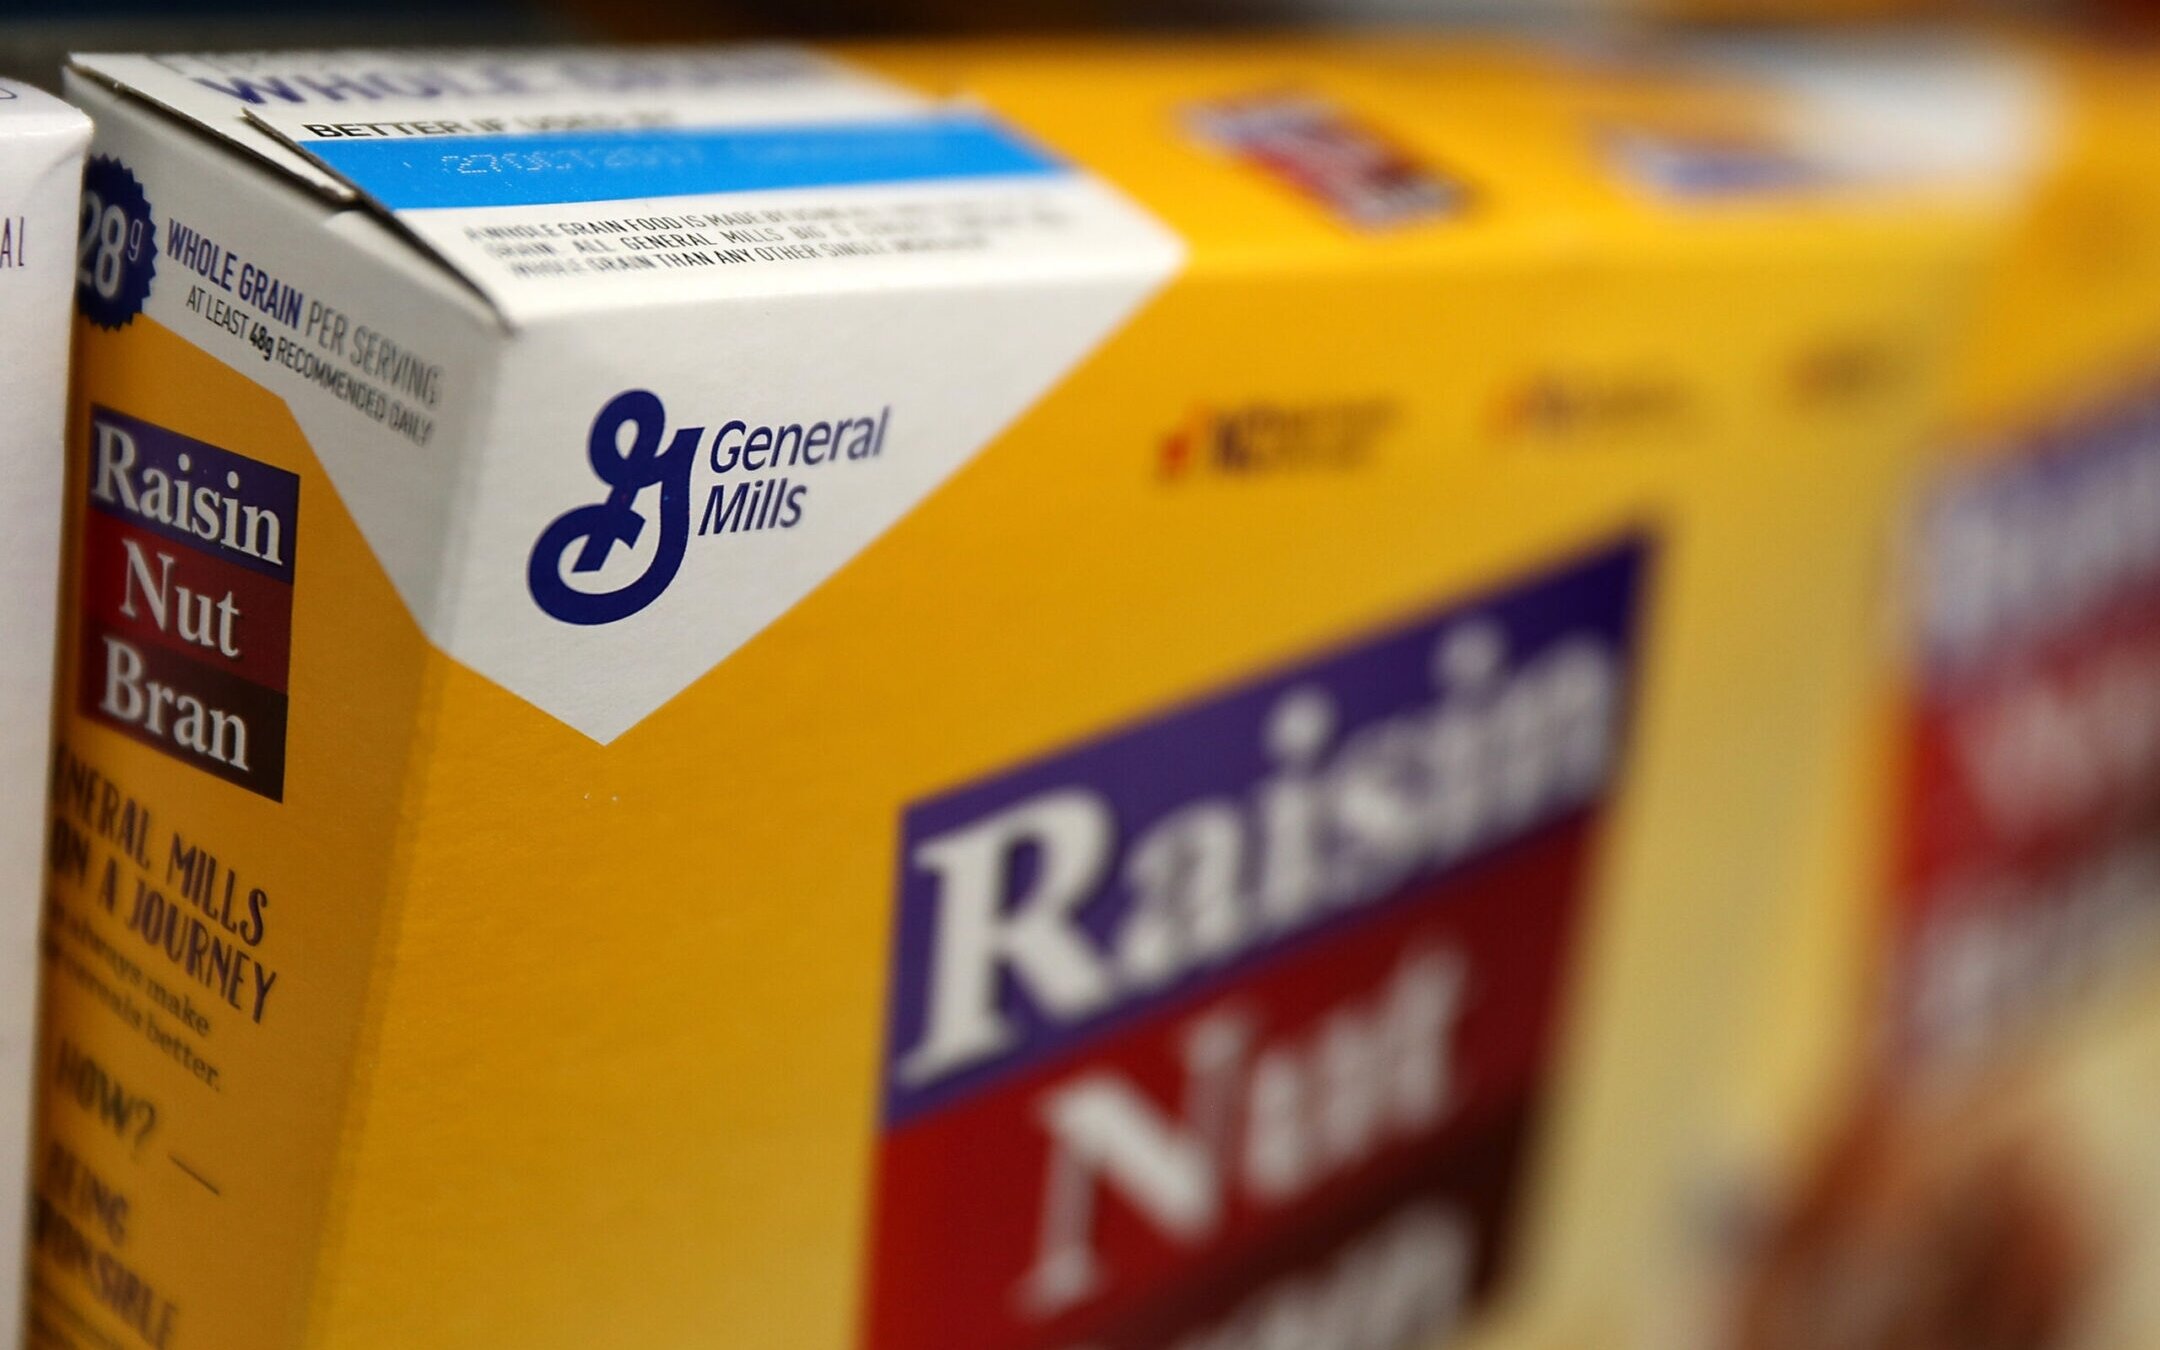 General Mills announced in June 2022 that it would be selling its Israeli business to its joint venture partner.